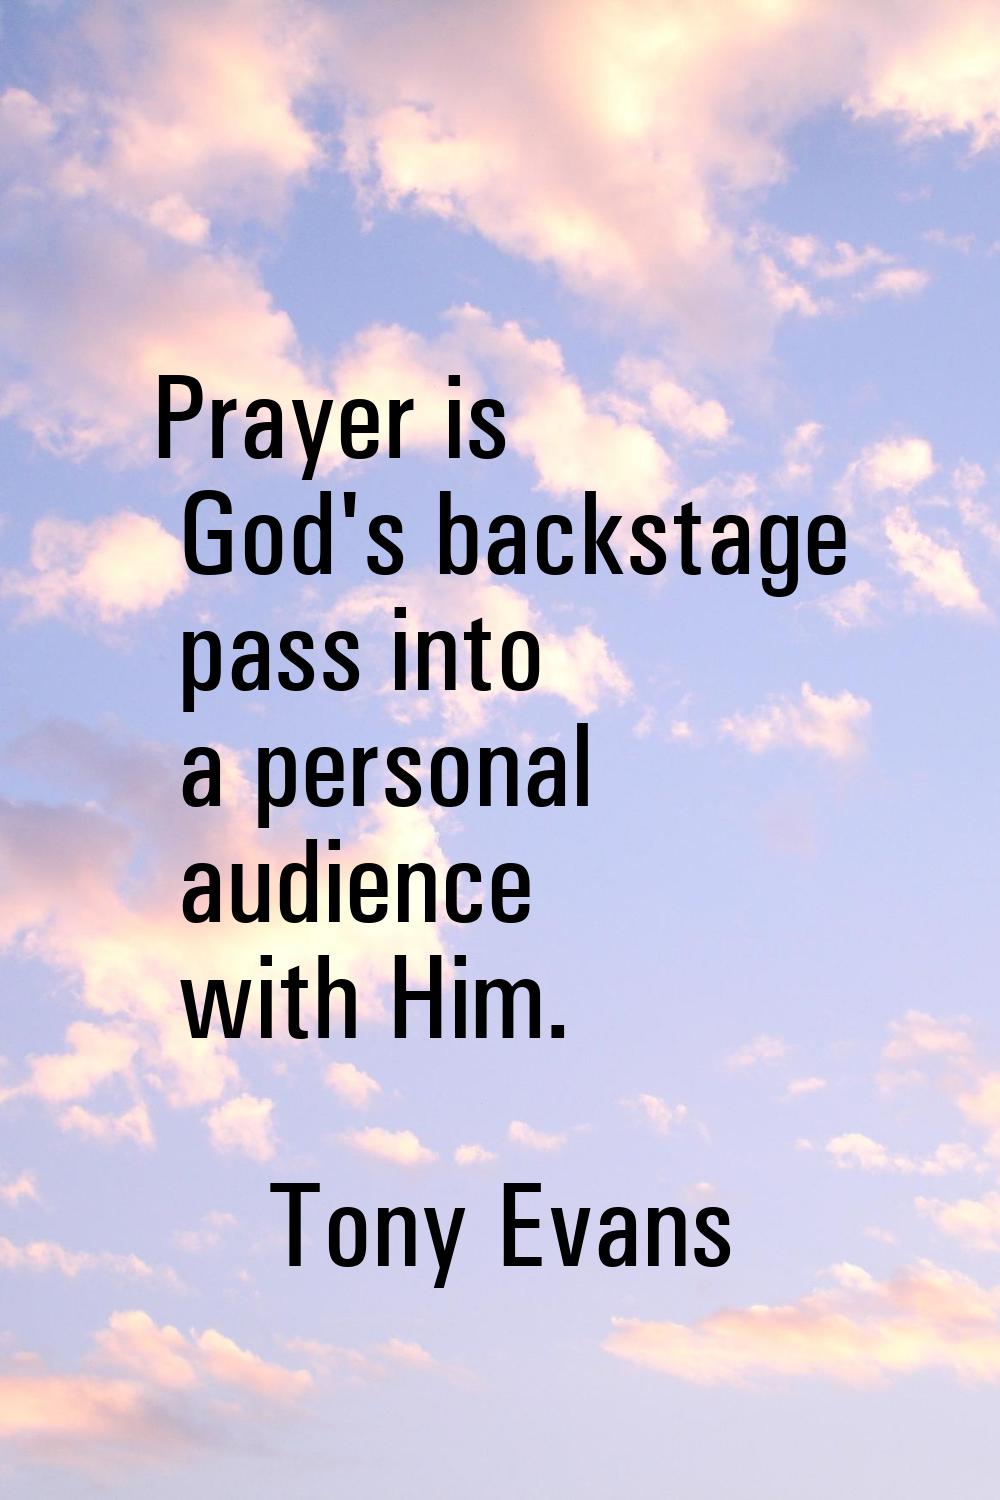 Prayer is God's backstage pass into a personal audience with Him.